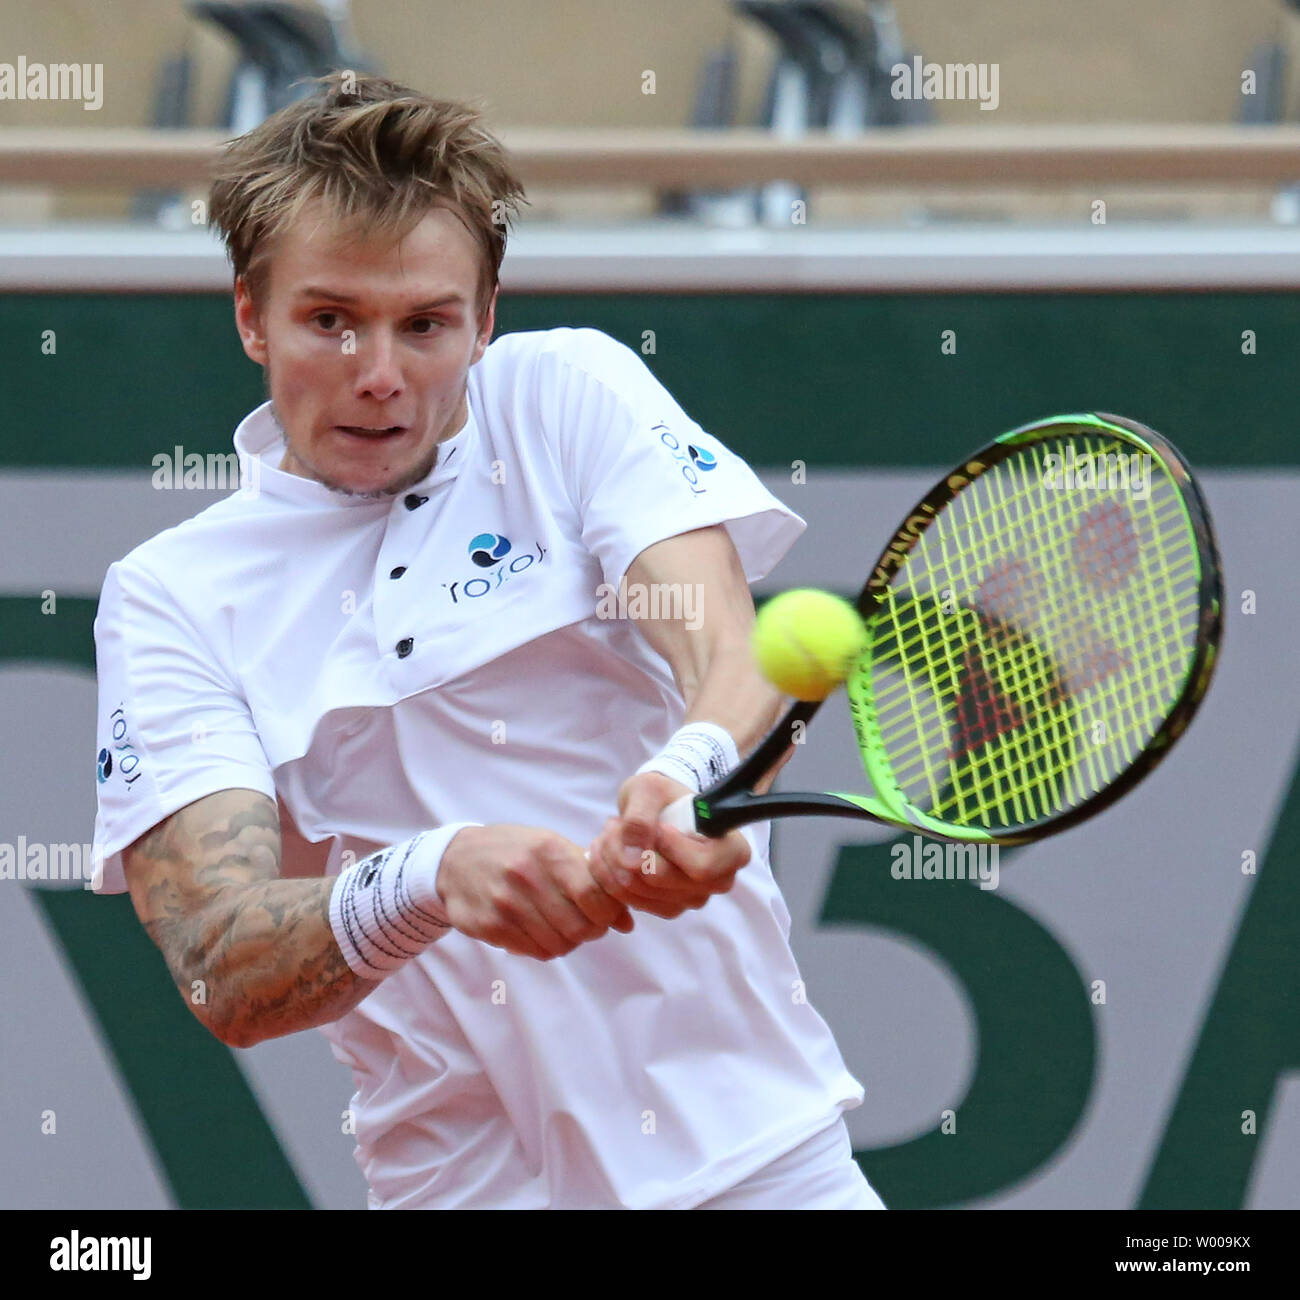 Alexander Bublik of Kazakhstan hits a shot during his French Open men's  second round match against Dominic Thiem of Austria at Roland Garros in  Paris on May 30, 2019. Thiem defeated Bublik